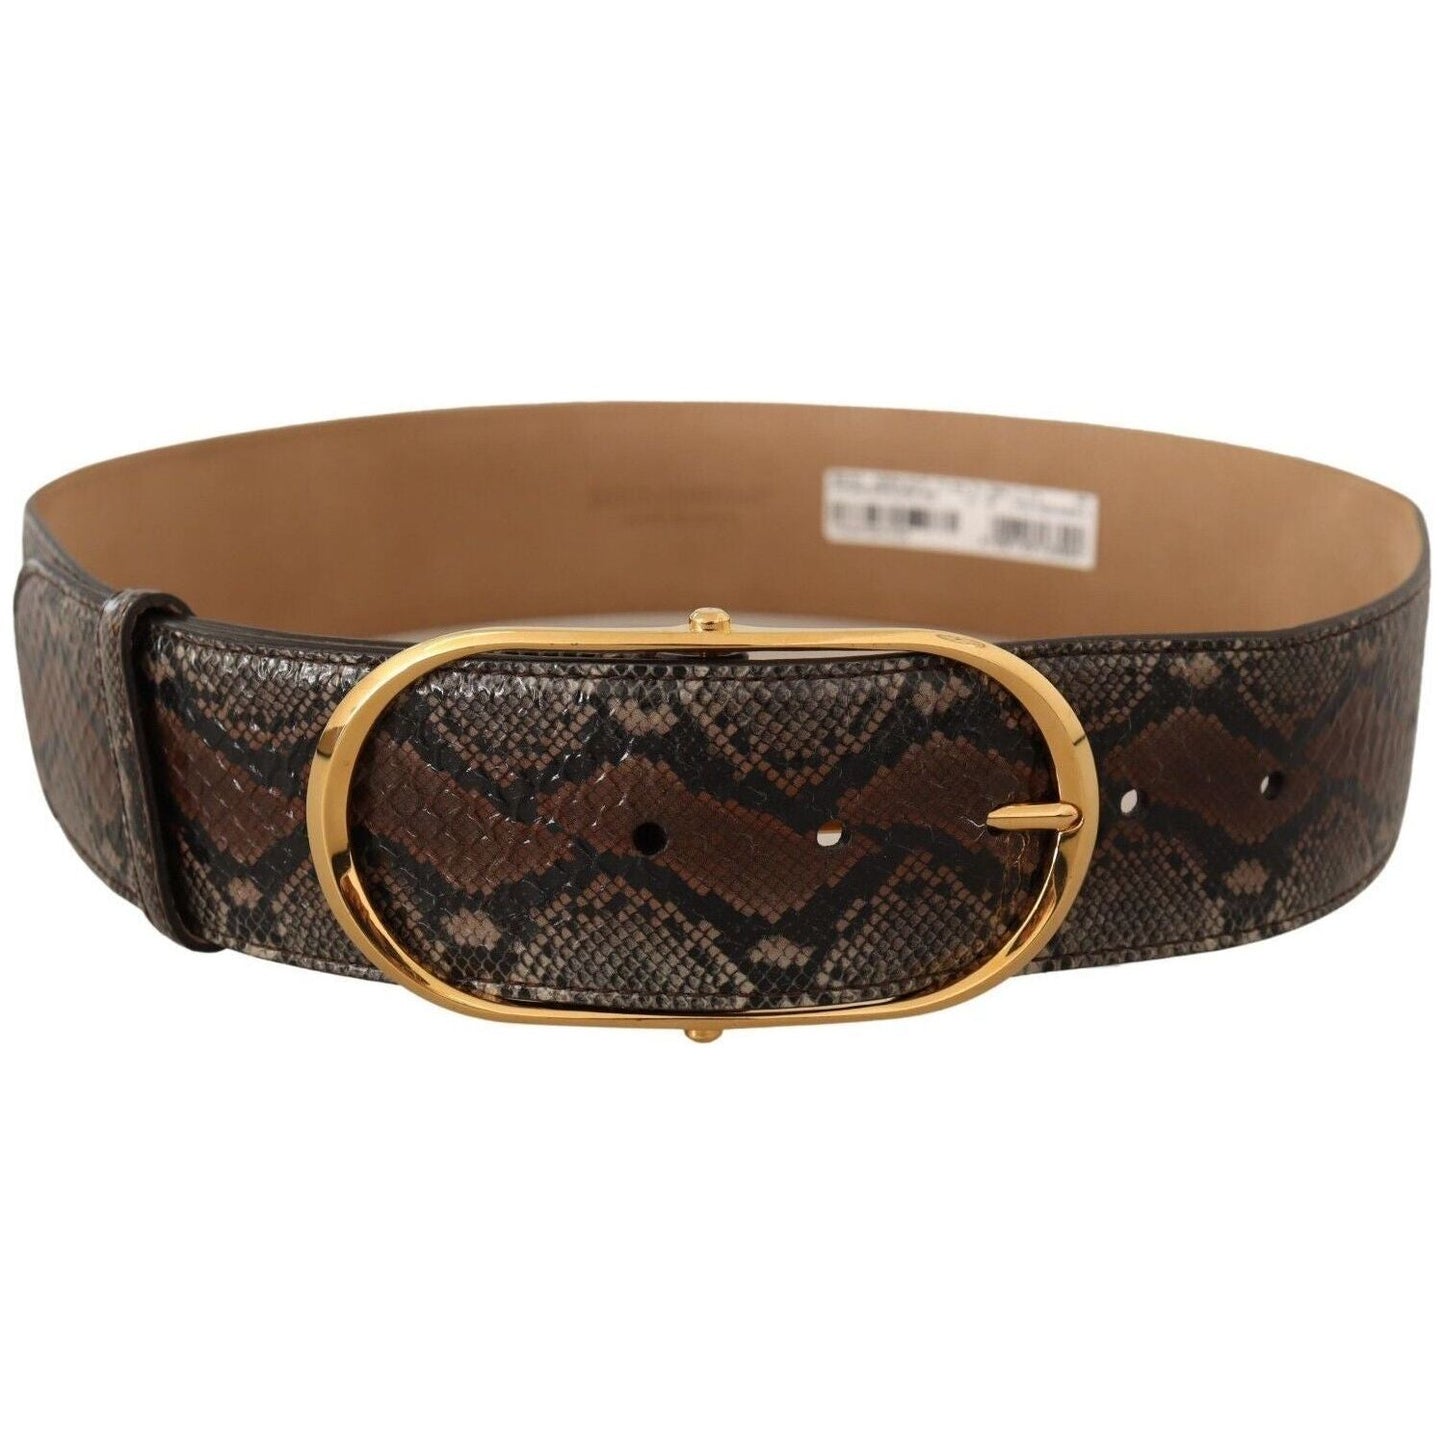 Dolce & Gabbana Elegant Brown Leather Belt with Gold Buckle WOMAN BELTS brown-exotic-leather-gold-oval-buckle-belt-5 s-l1600-282-c2e0bab2-b3c.jpg